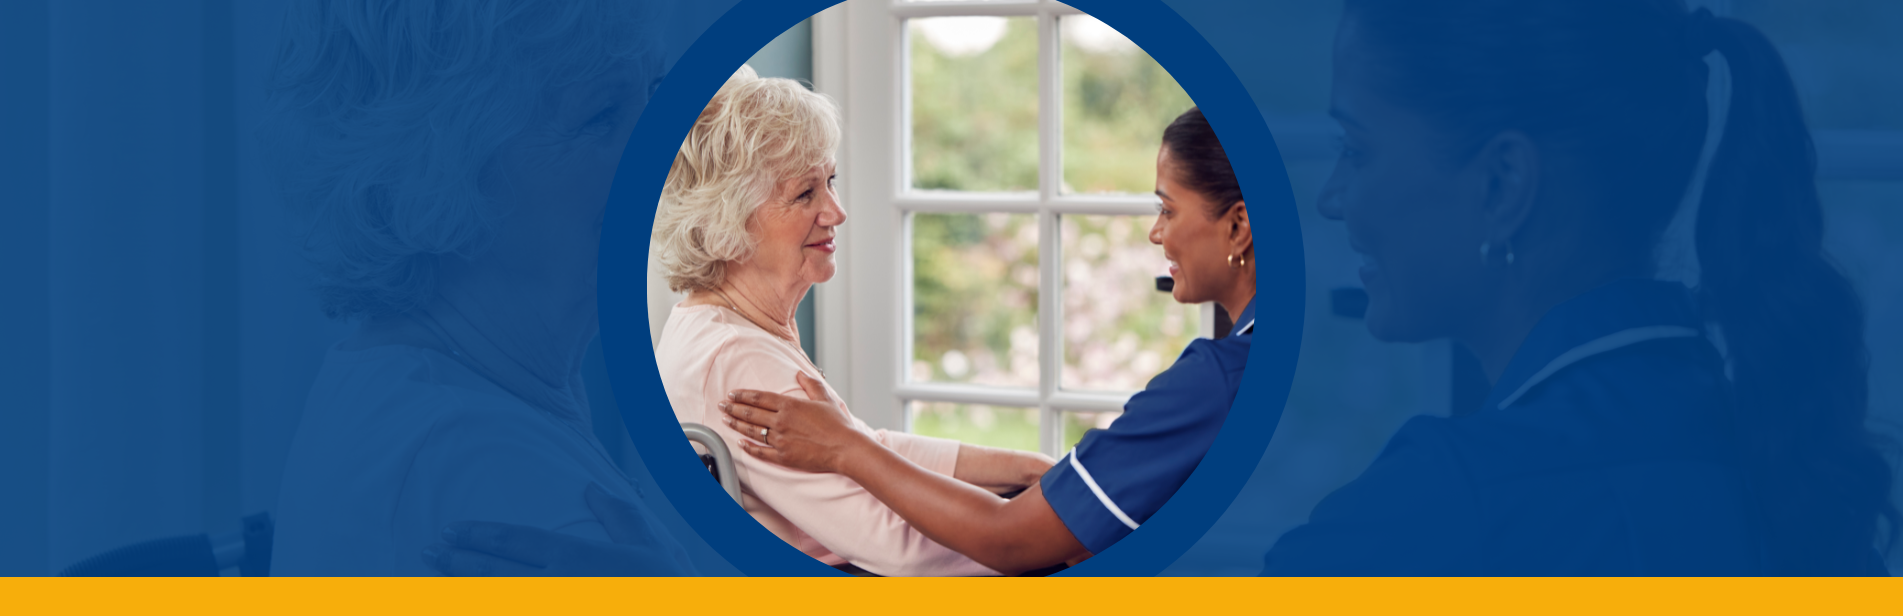 The Benefits of Homecare for People of All Ages